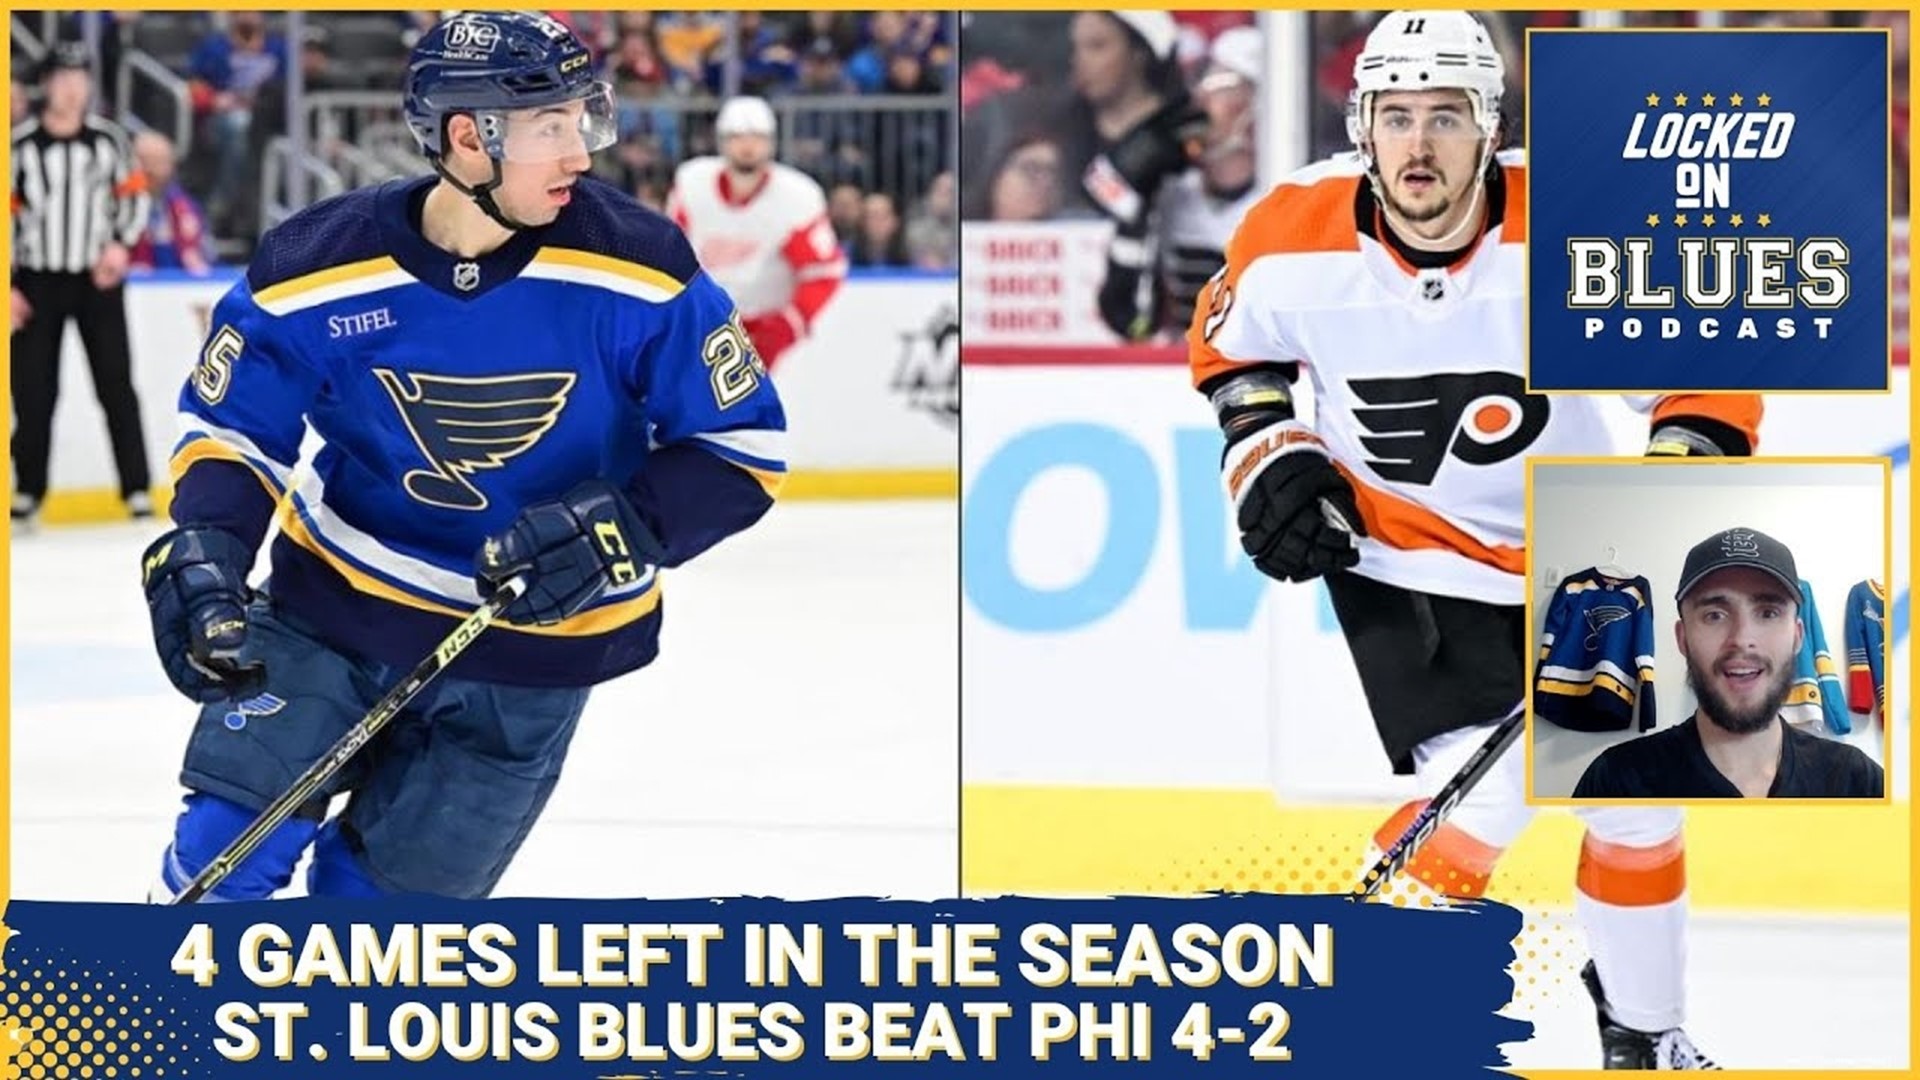 4 Games Left... How Will the St. Louis Blues Finish?